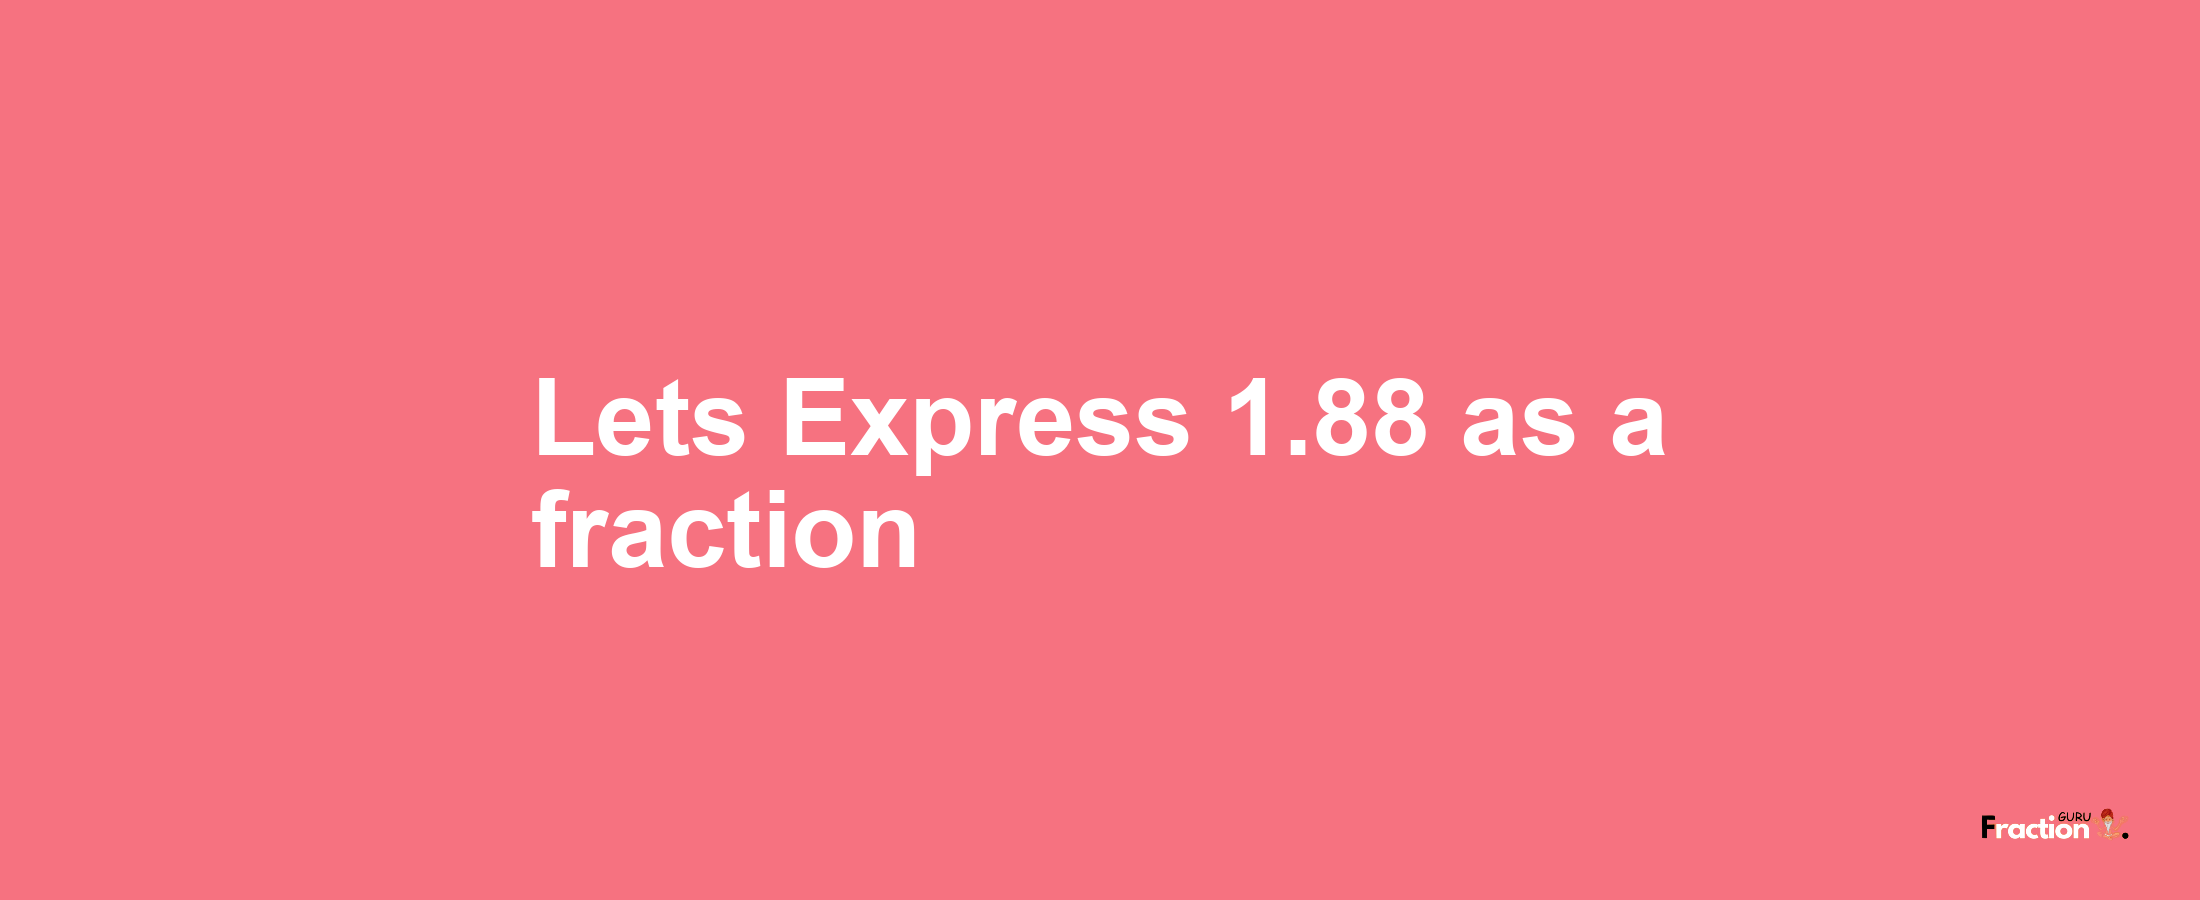 Lets Express 1.88 as afraction